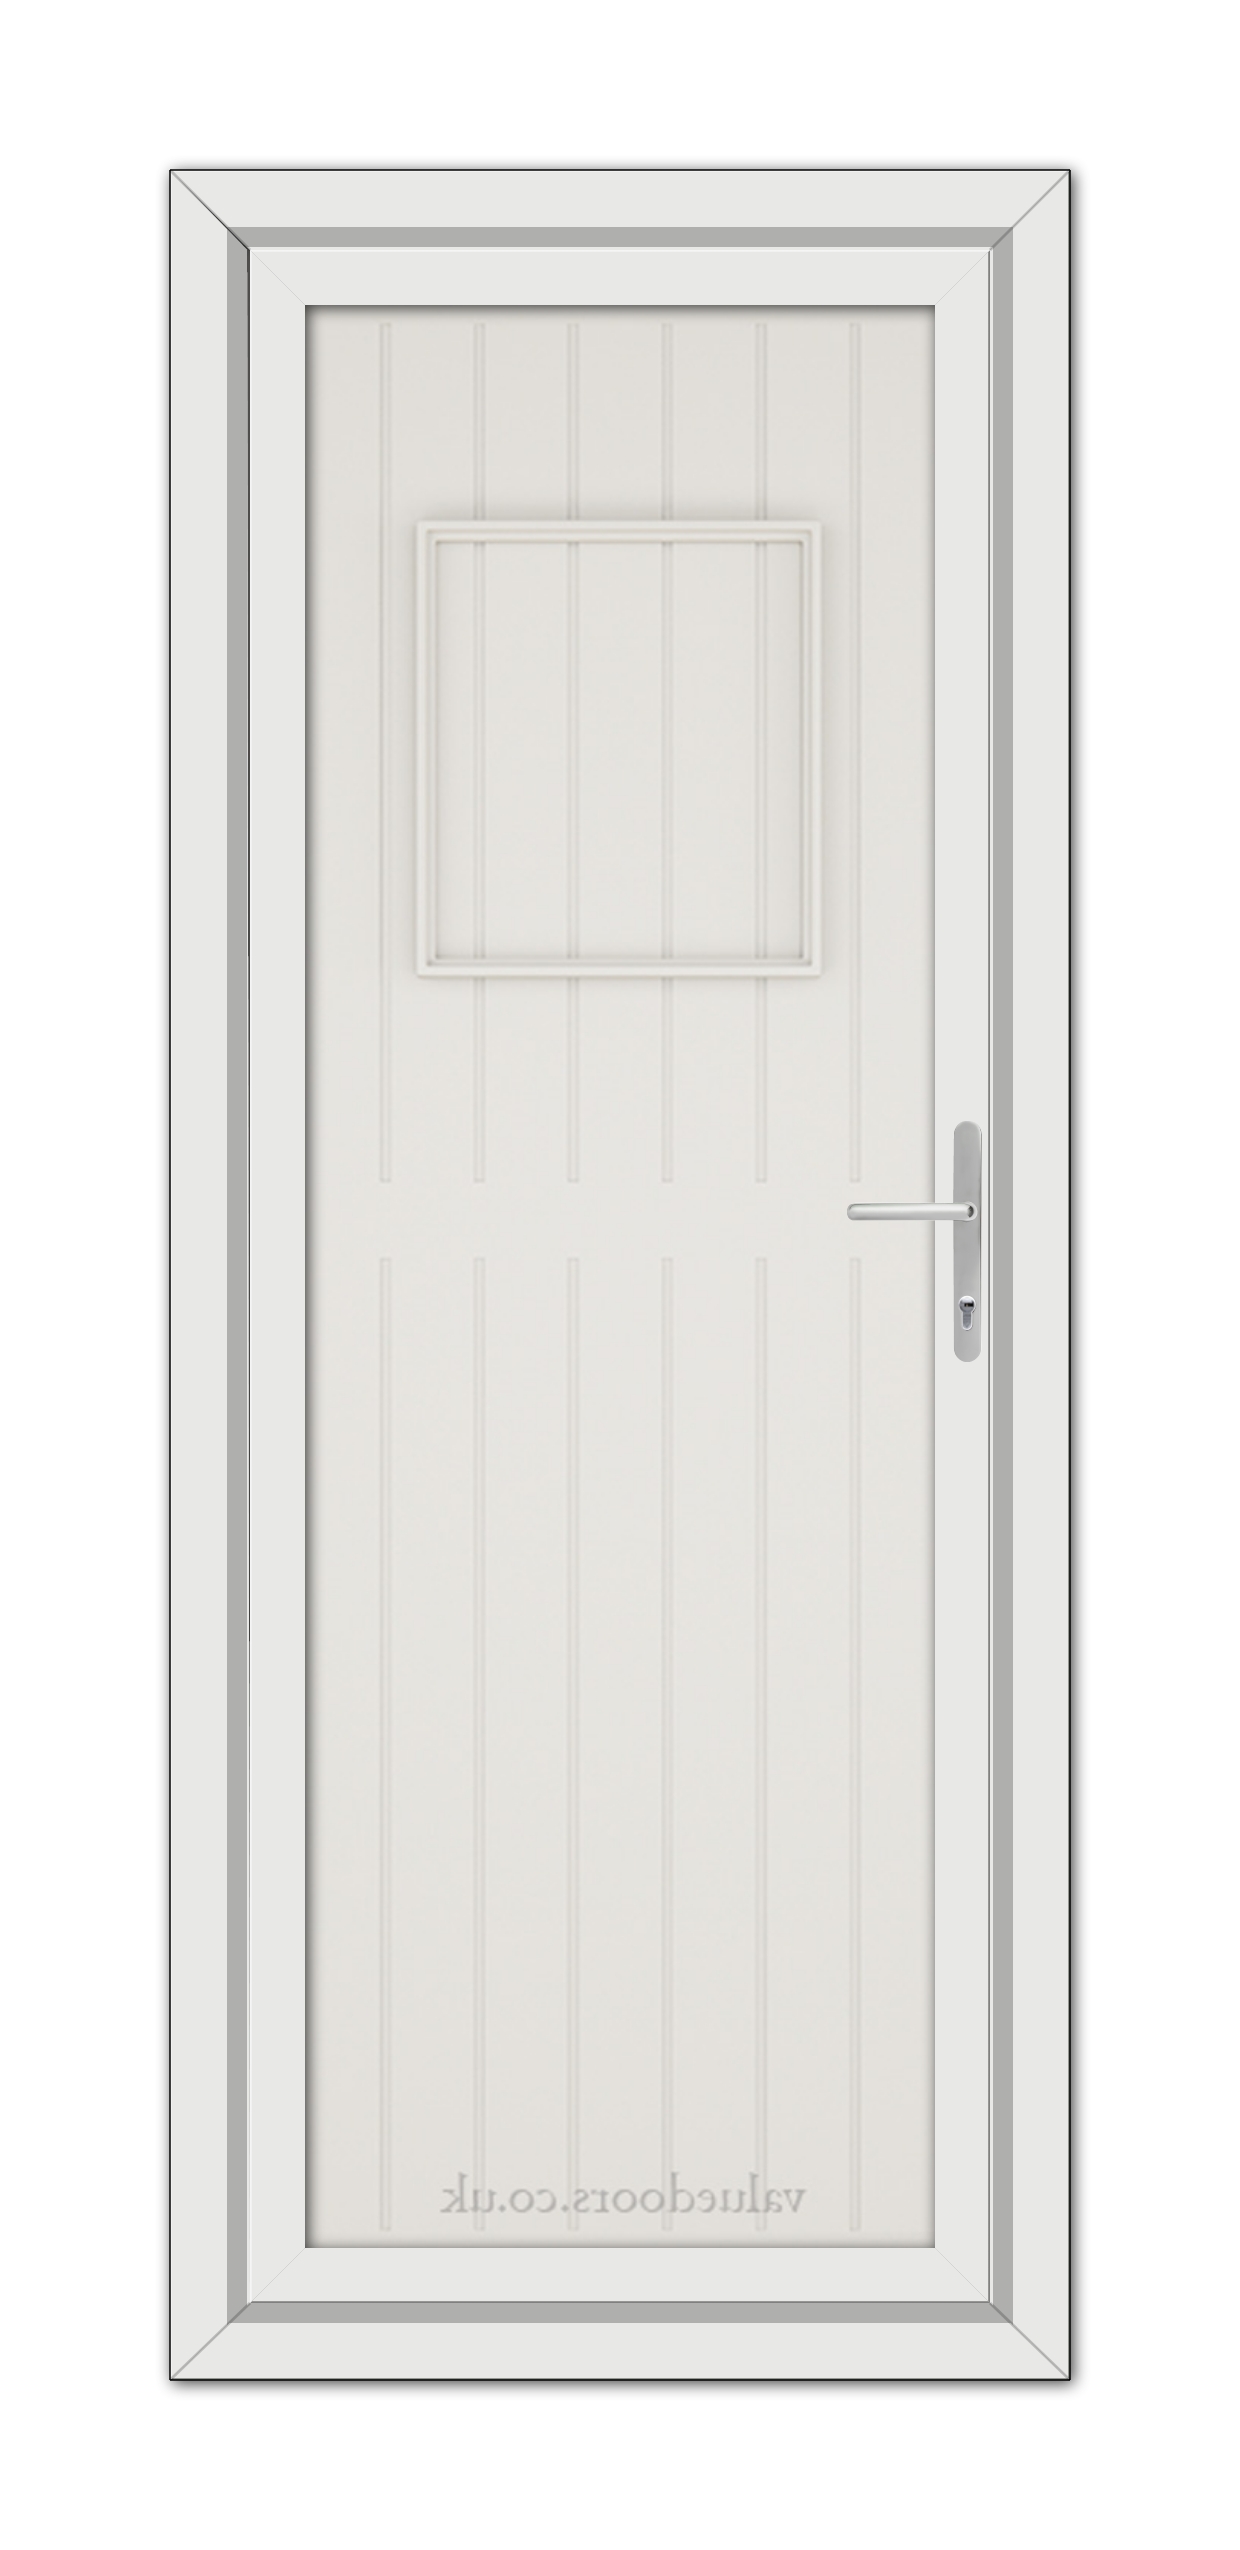 White Cream Chatsworth Solid uPVC Door with a small square window at the top and a metallic handle, set within a frame.